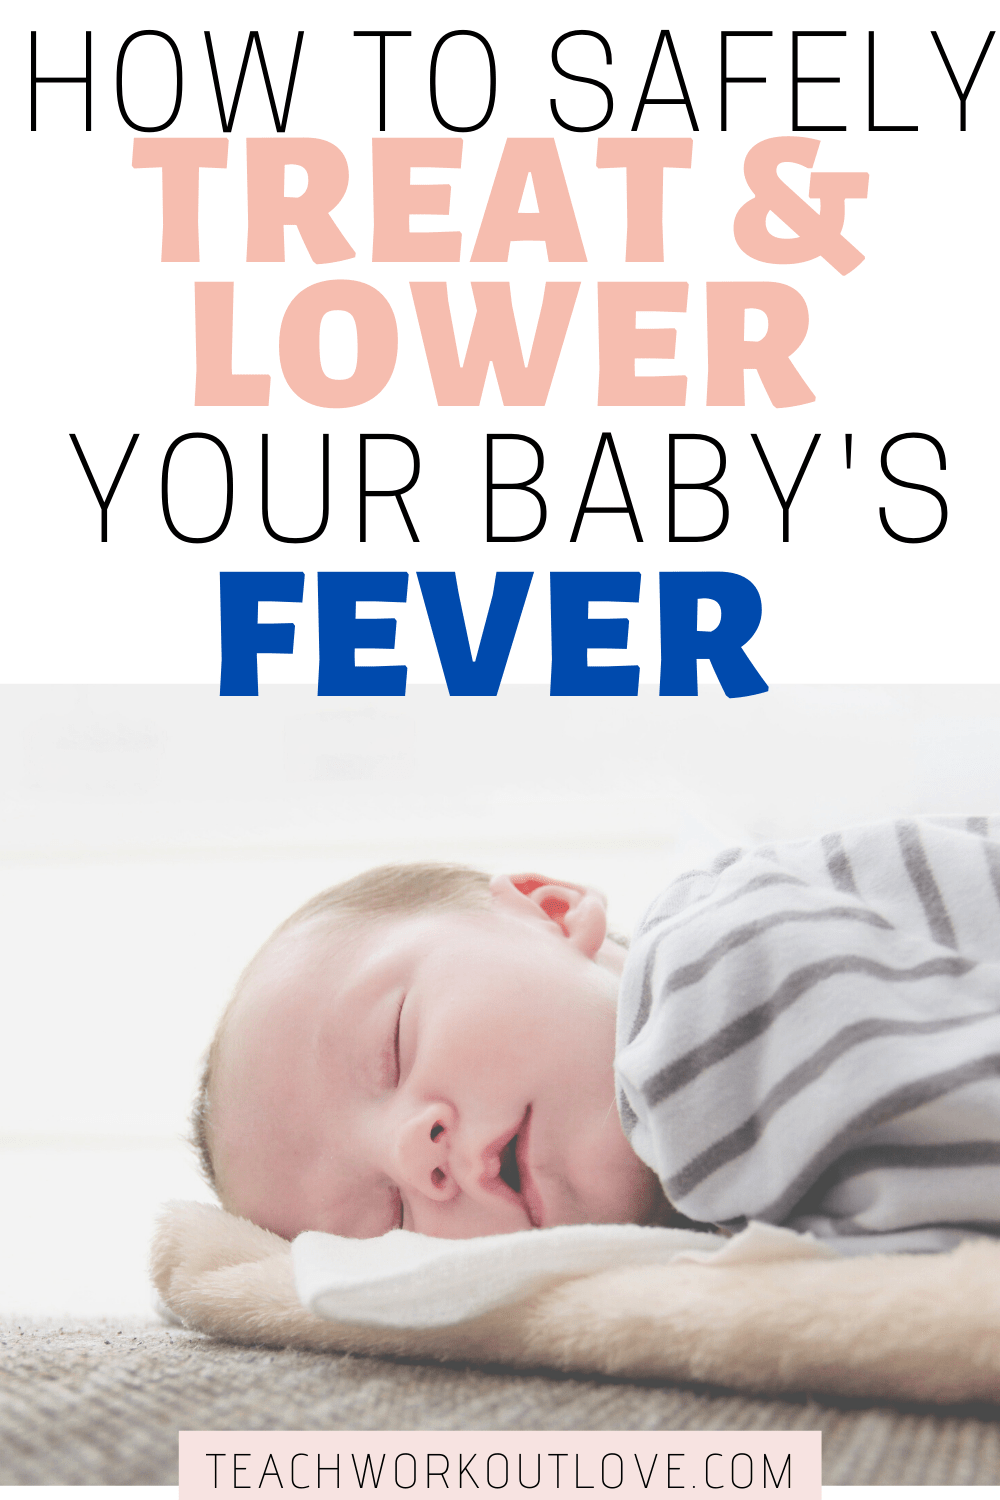 Do you know what to do when your baby has a fever? Here is how to safely treat and lower your baby's fever using this in-depth guide.